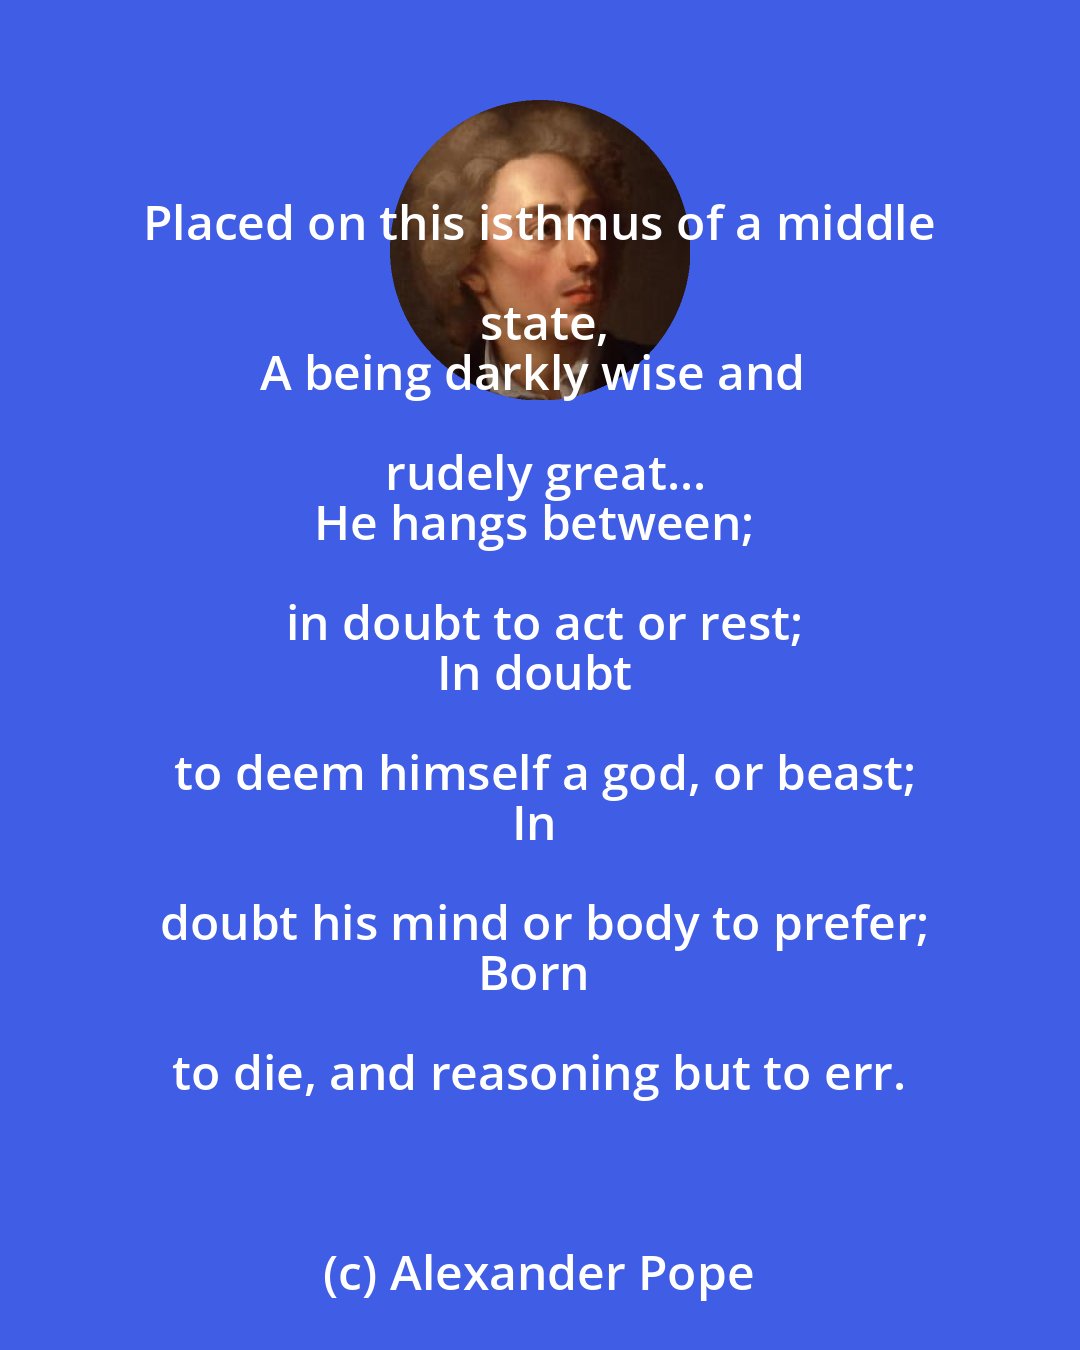 Alexander Pope: Placed on this isthmus of a middle state,
A being darkly wise and rudely great...
He hangs between; in doubt to act or rest;
In doubt to deem himself a god, or beast;
In doubt his mind or body to prefer;
Born to die, and reasoning but to err.